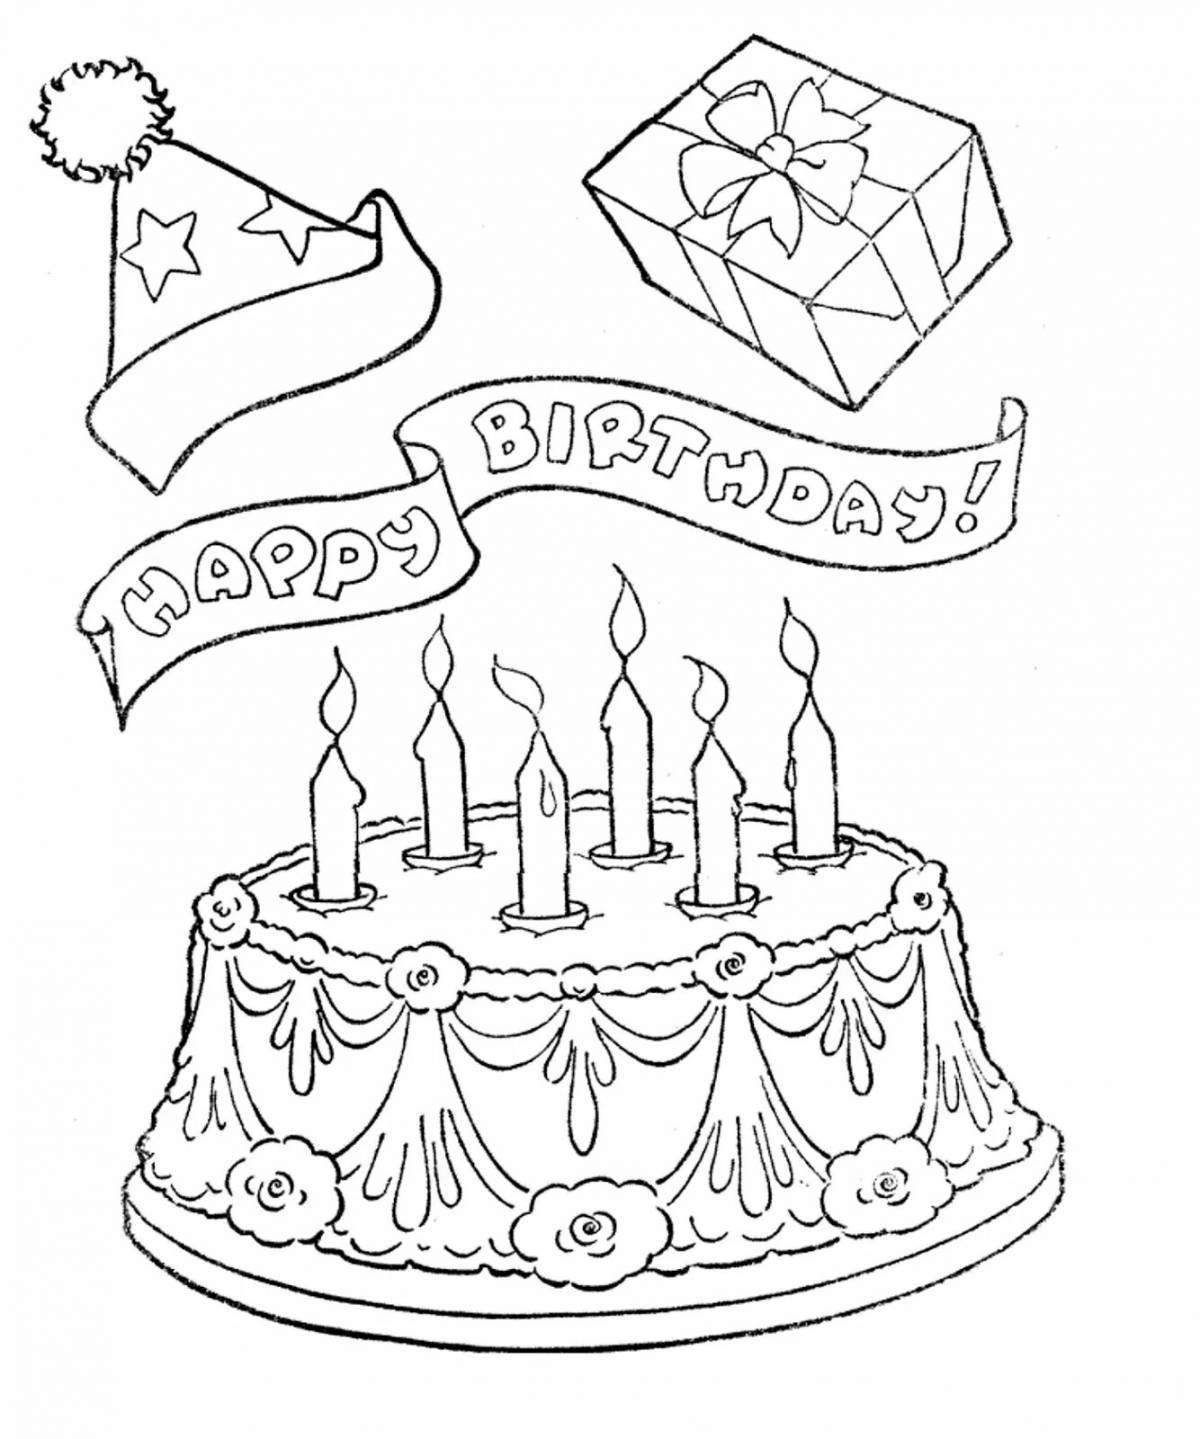 Coloring page of nice little sister for her birthday